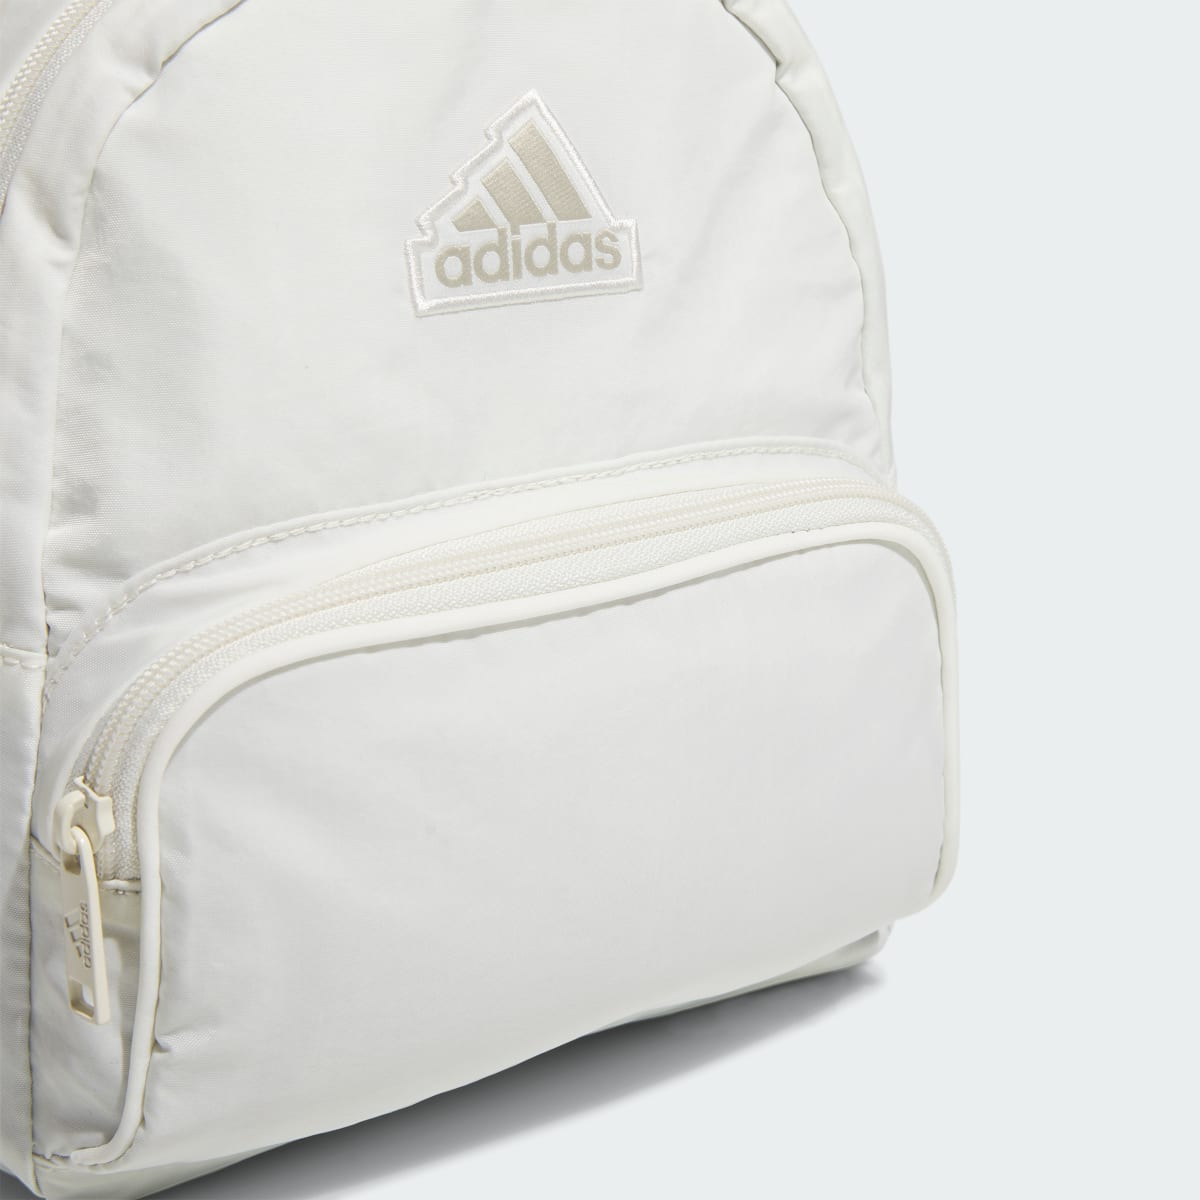 Adidas Must-Have Mini Backpack. 7